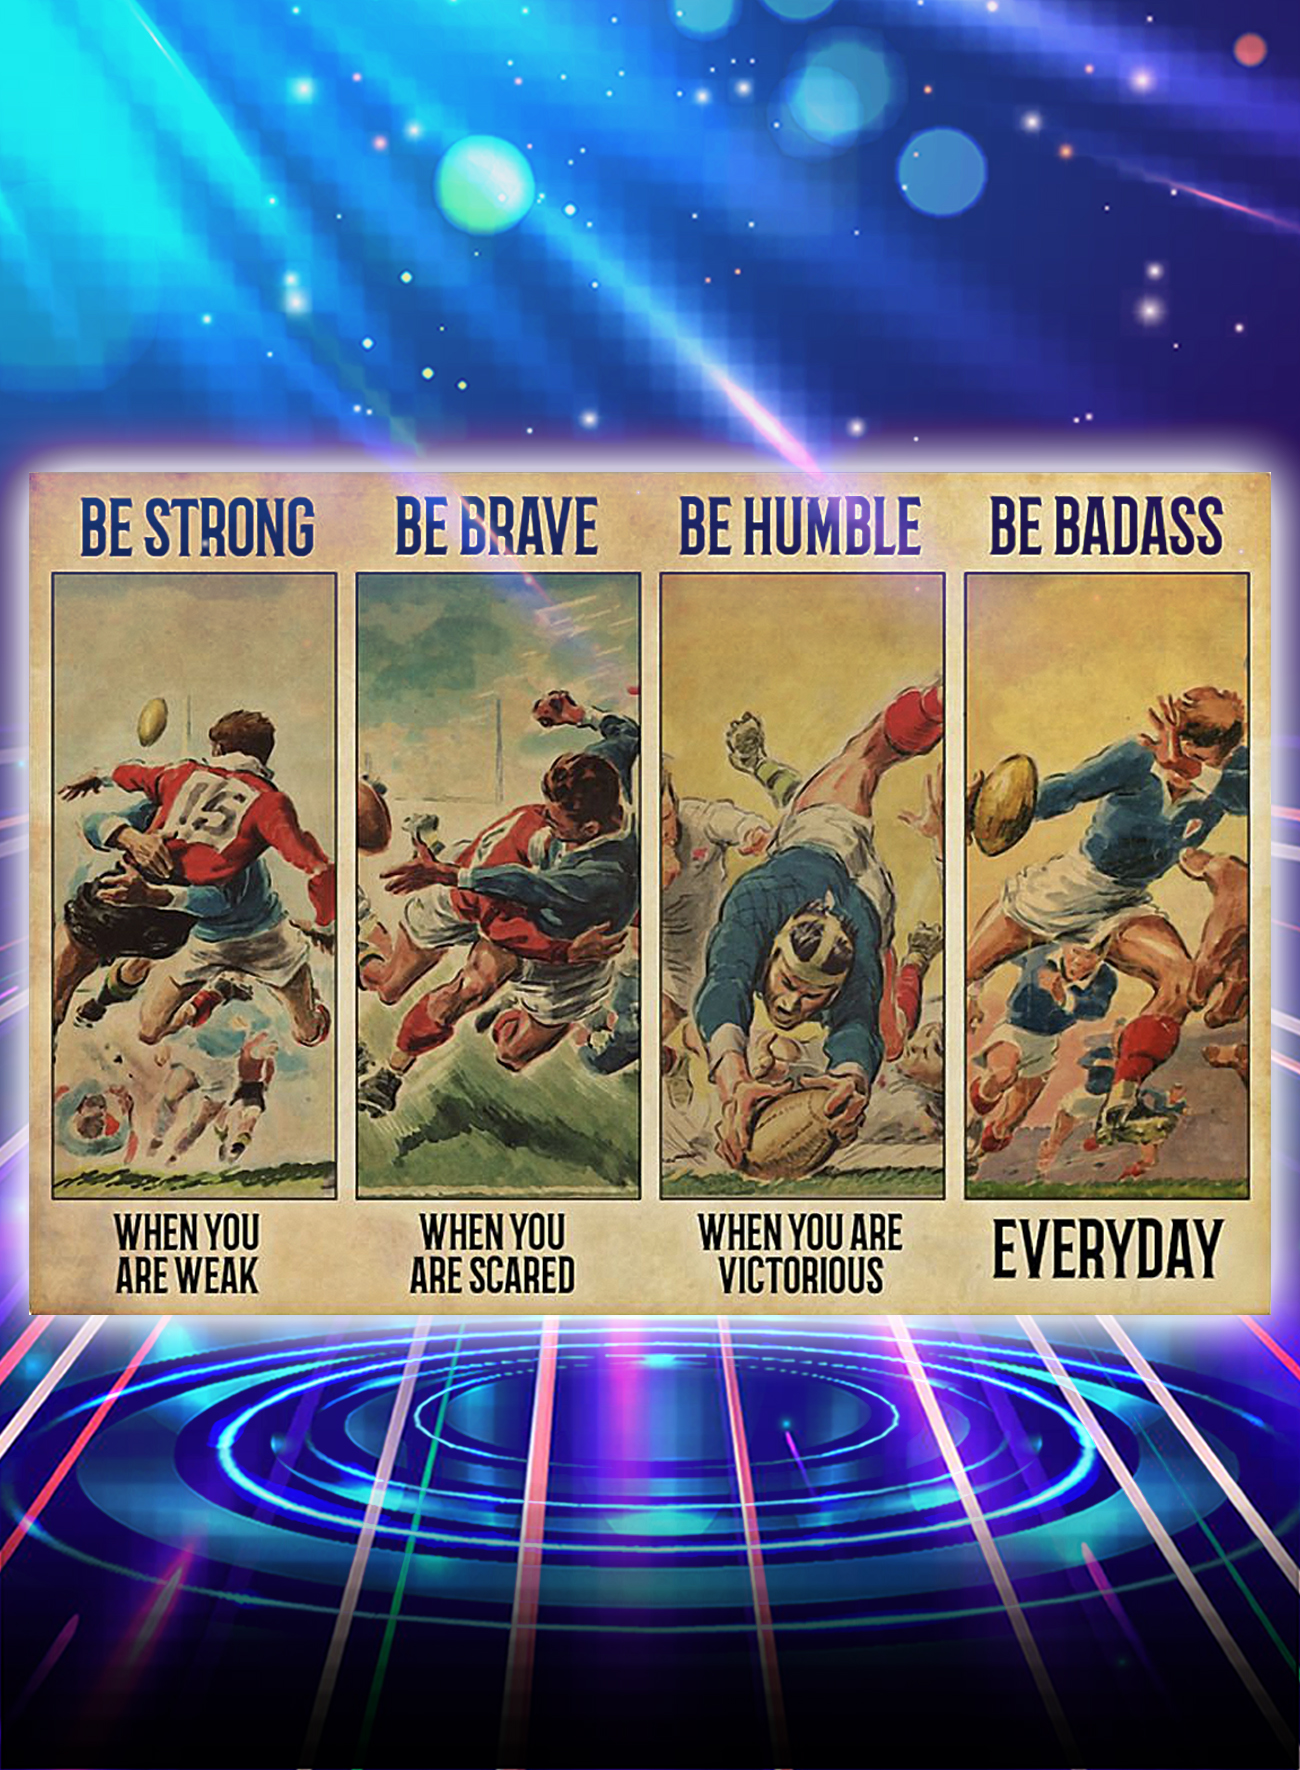 Rugby be strong be brave be humble be badass poster